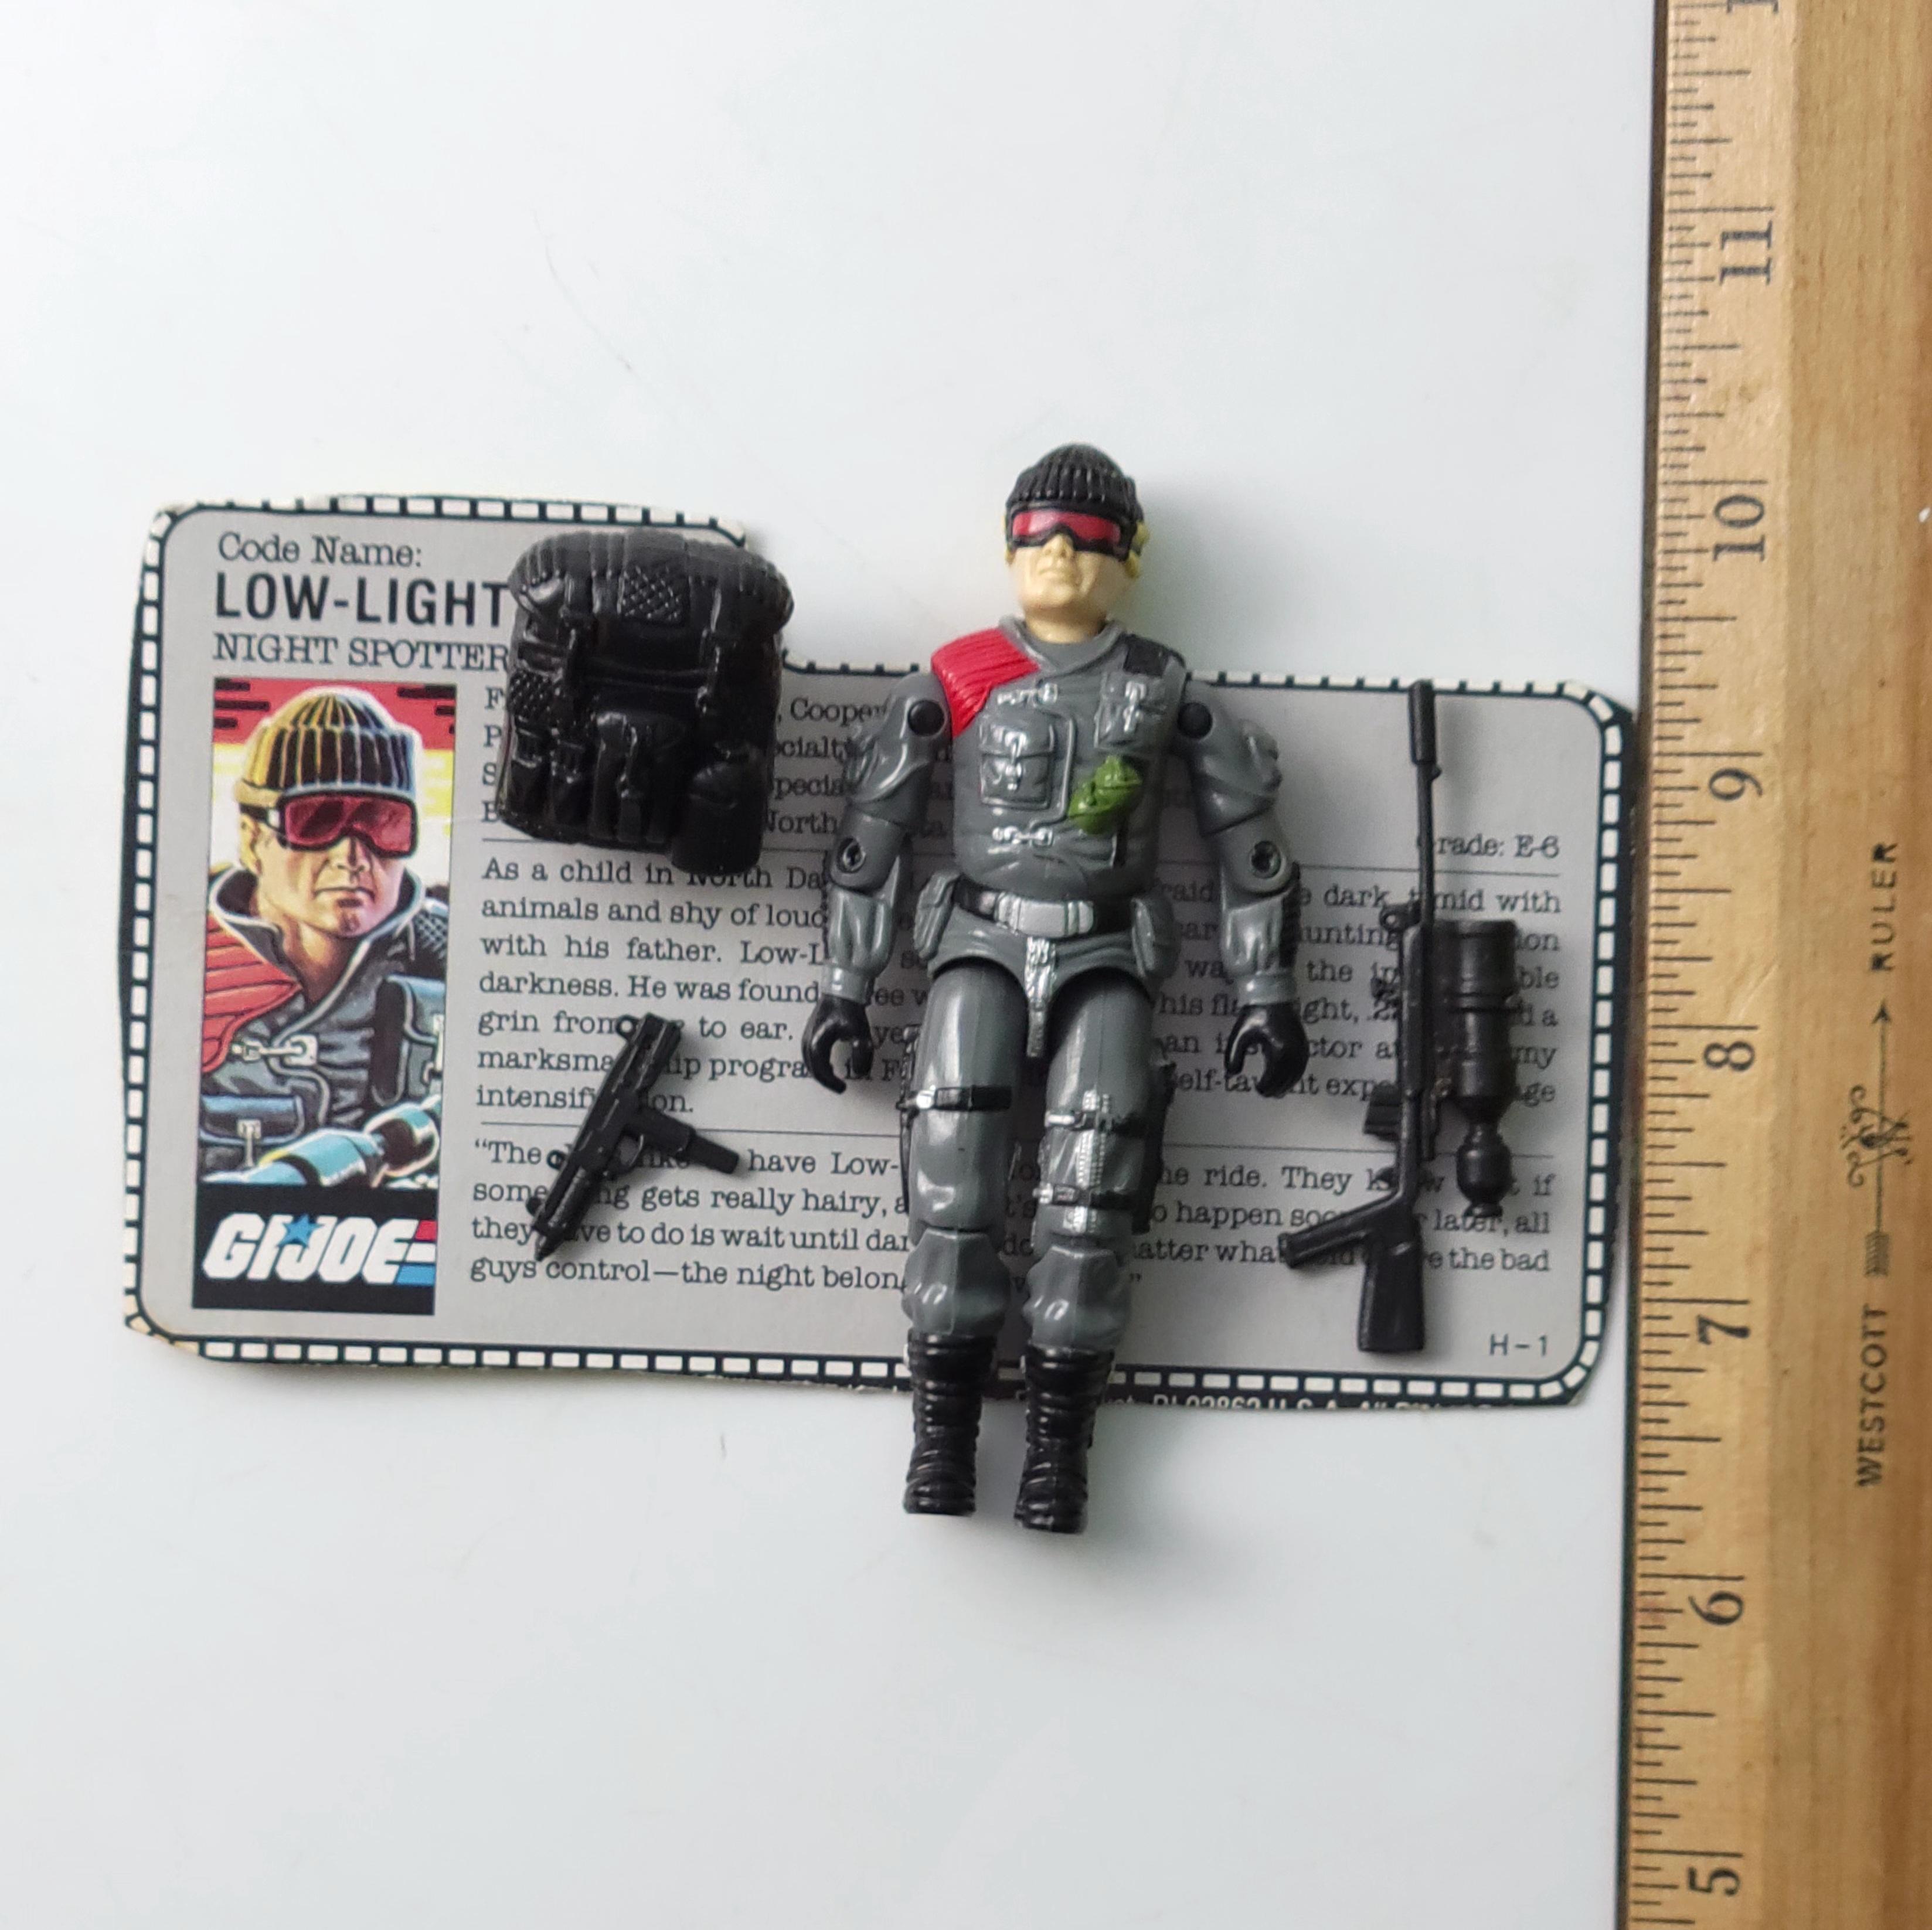 Low-Light 1986 G.I. Action Figure Toy w/ File Card